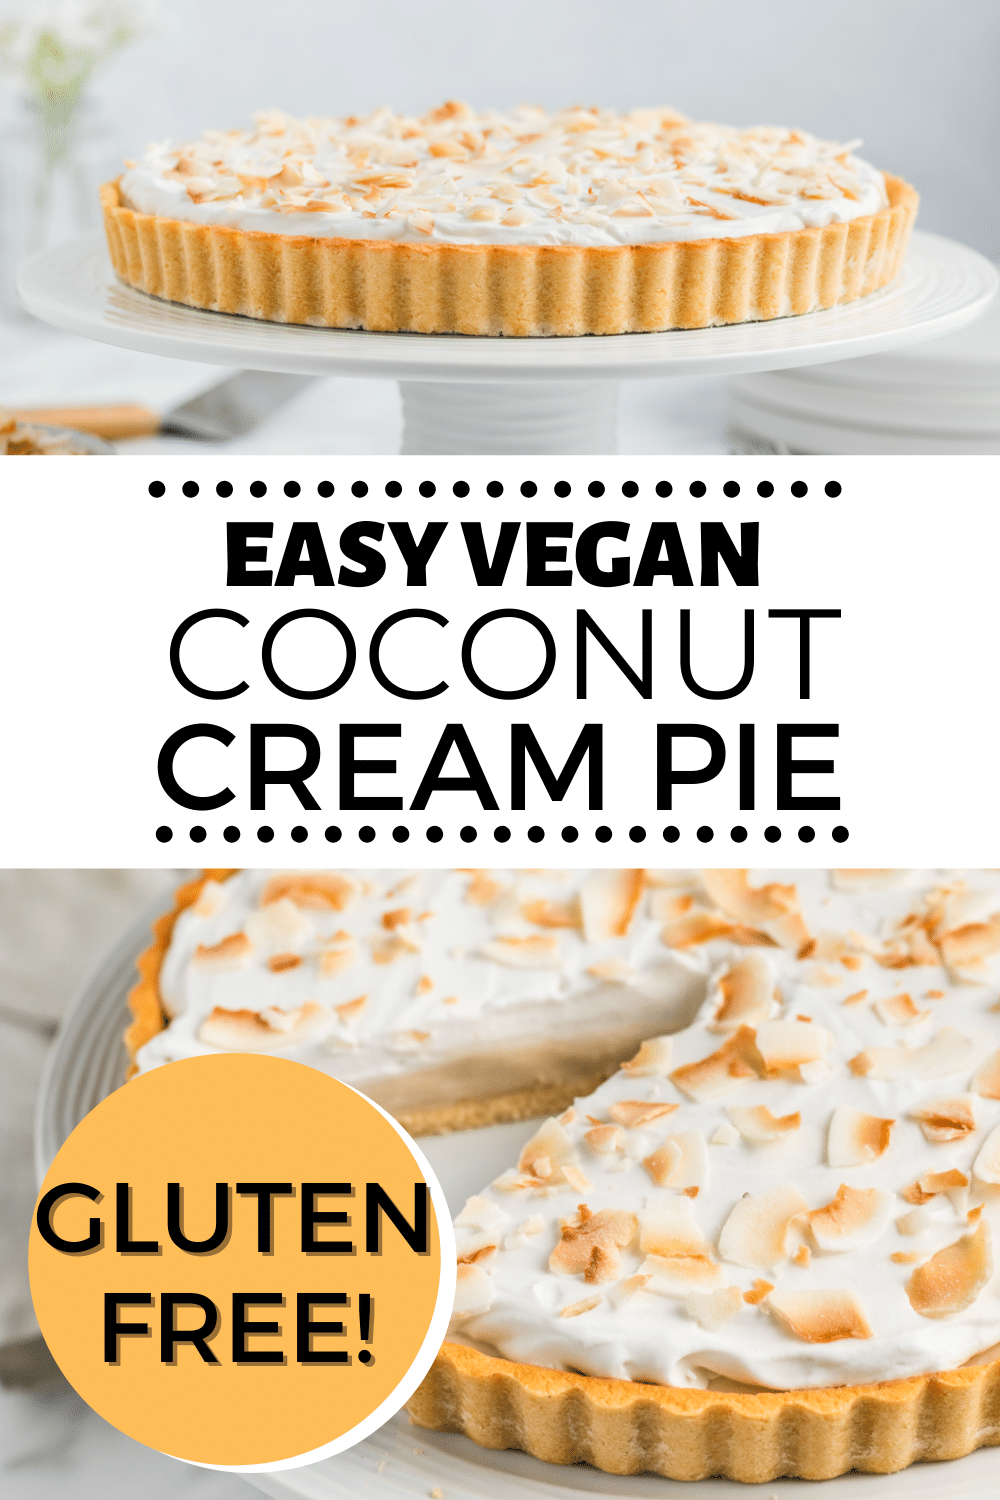 This simple recipe for Vegan Coconut Cream Pie has so much delicious. sweet, coconut flavor! You'll love how easy it is to make a vegan cream pie with canned coconut milk and coconut cream.